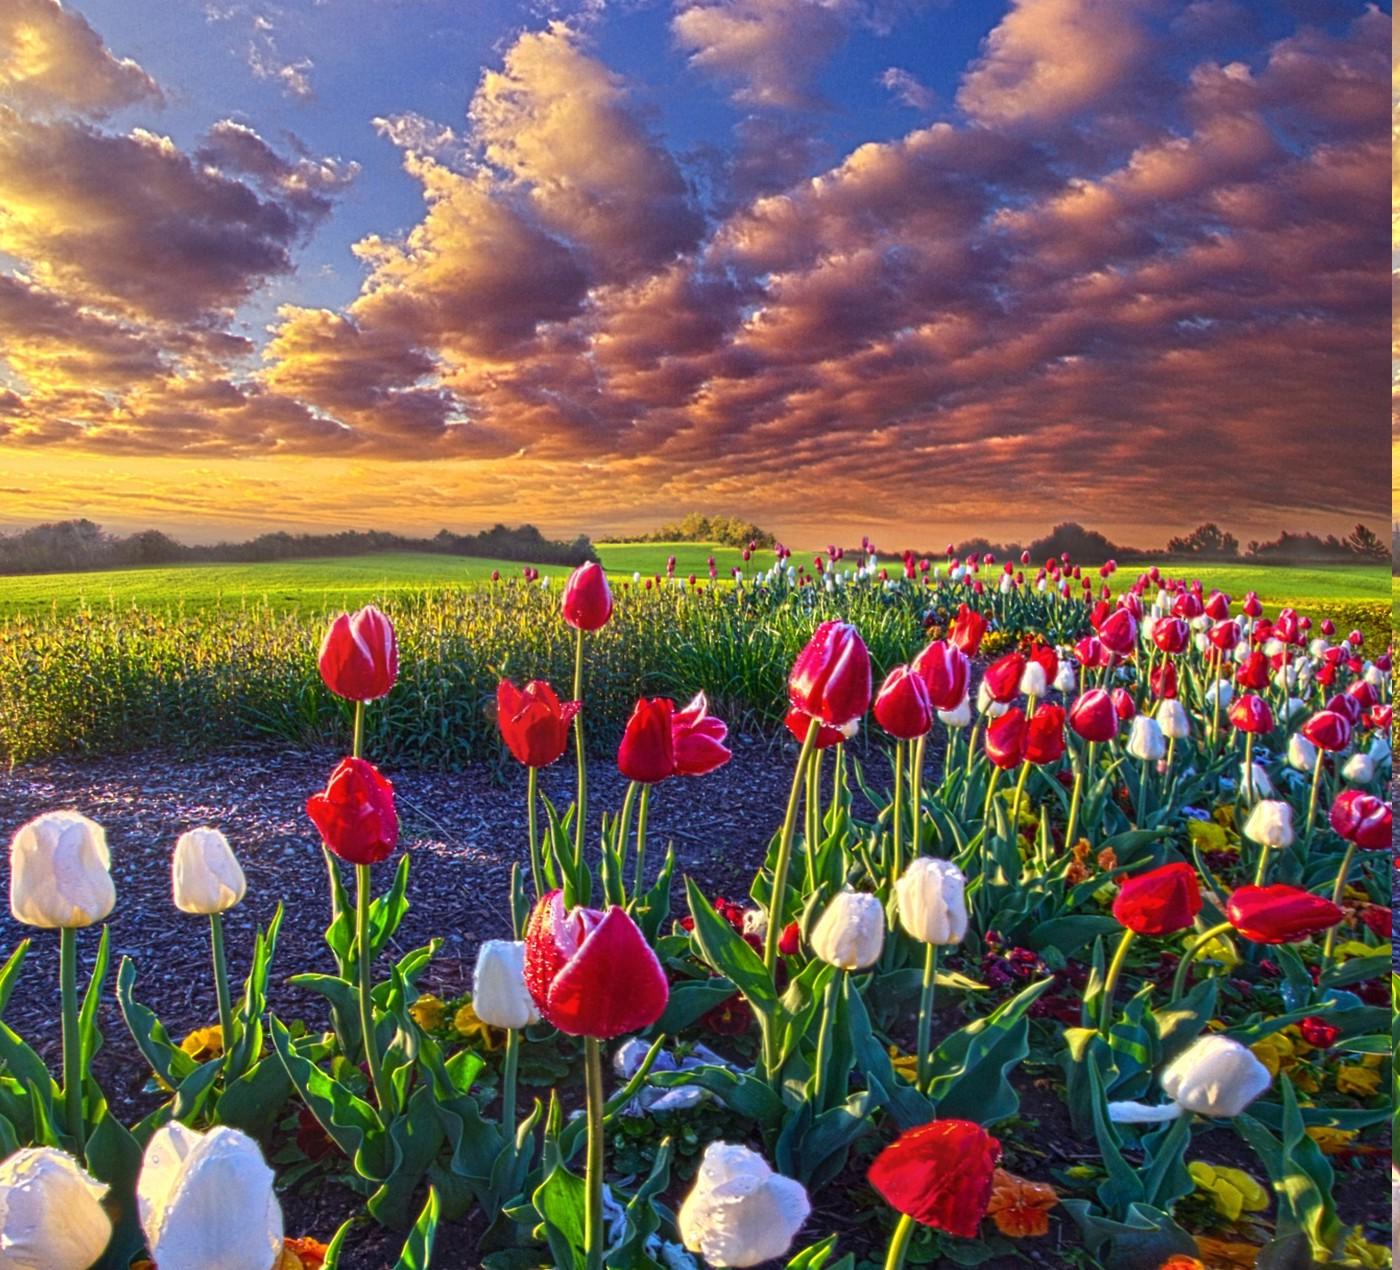 spring, Flowers, Tulips, Field, Sunrise, Grass, Clouds, Nature, Landscape Wallpaper HD / Desktop and Mobile Background